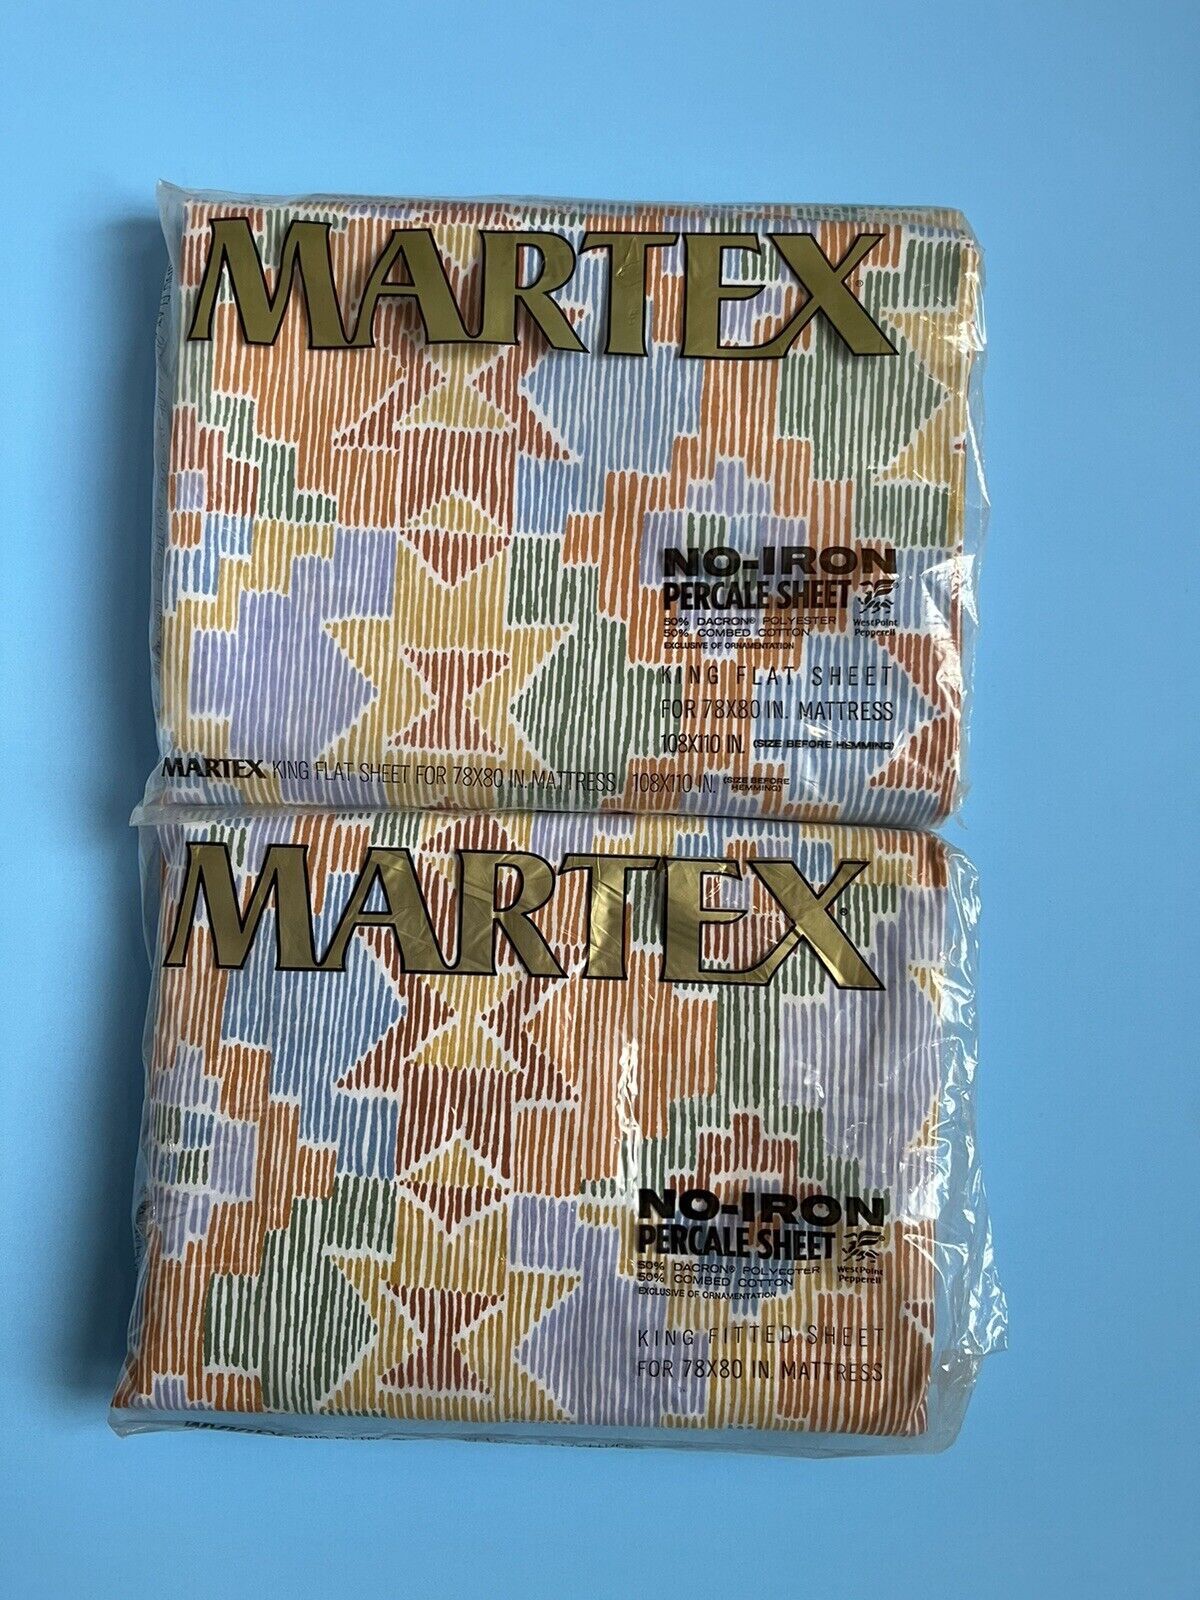 Vintage Deadstock King Size Martex Sheets | Martex West Point Pepperell Sheets